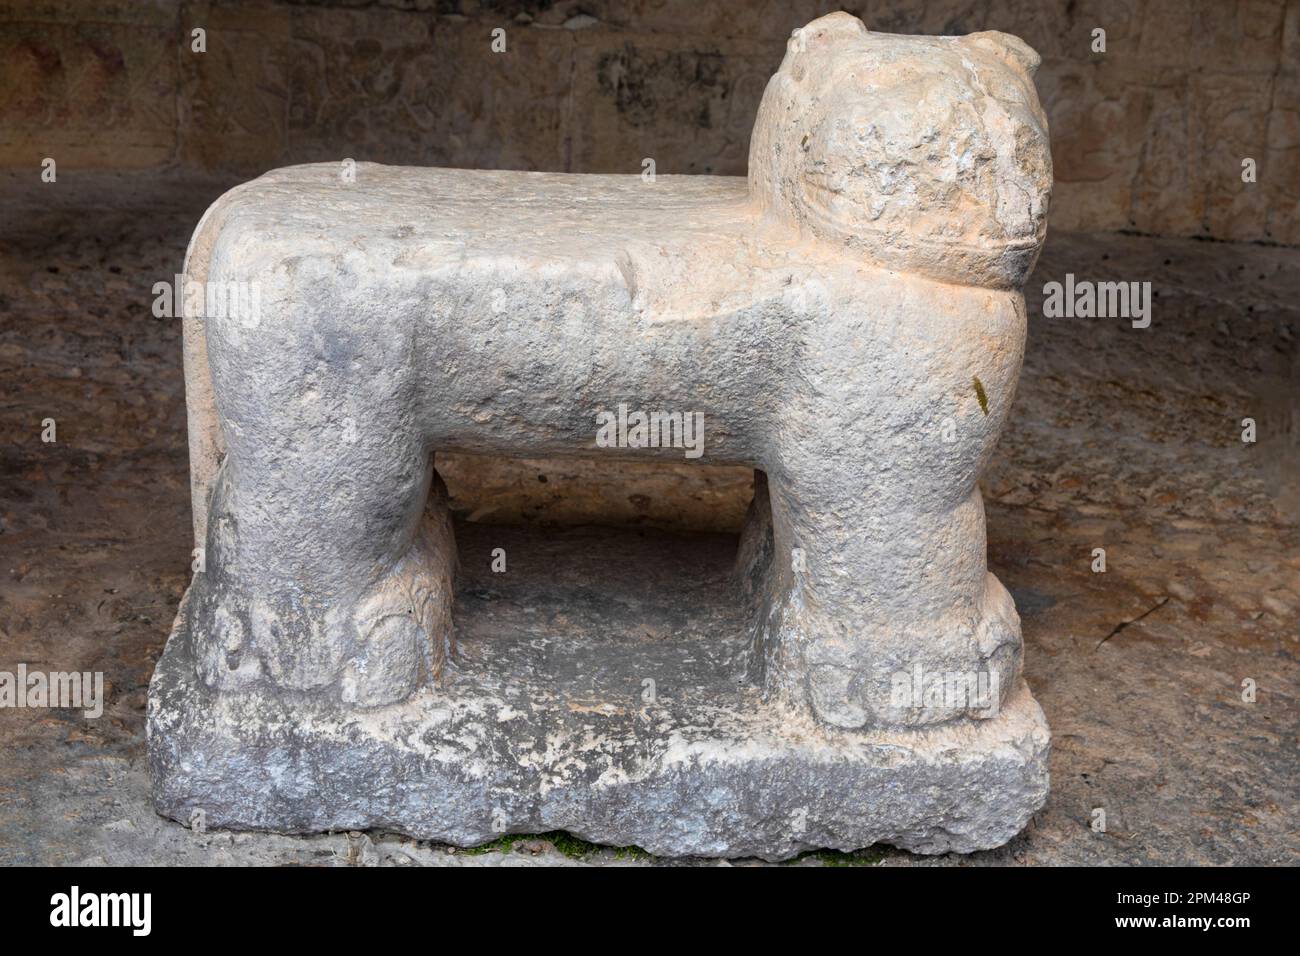 A statue known as a chacmool from the Mayan ruins of the pyramid of Chichen Itza, in the Yucatan Peninsula, the ancient ruins of the Mayan. Stock Photo